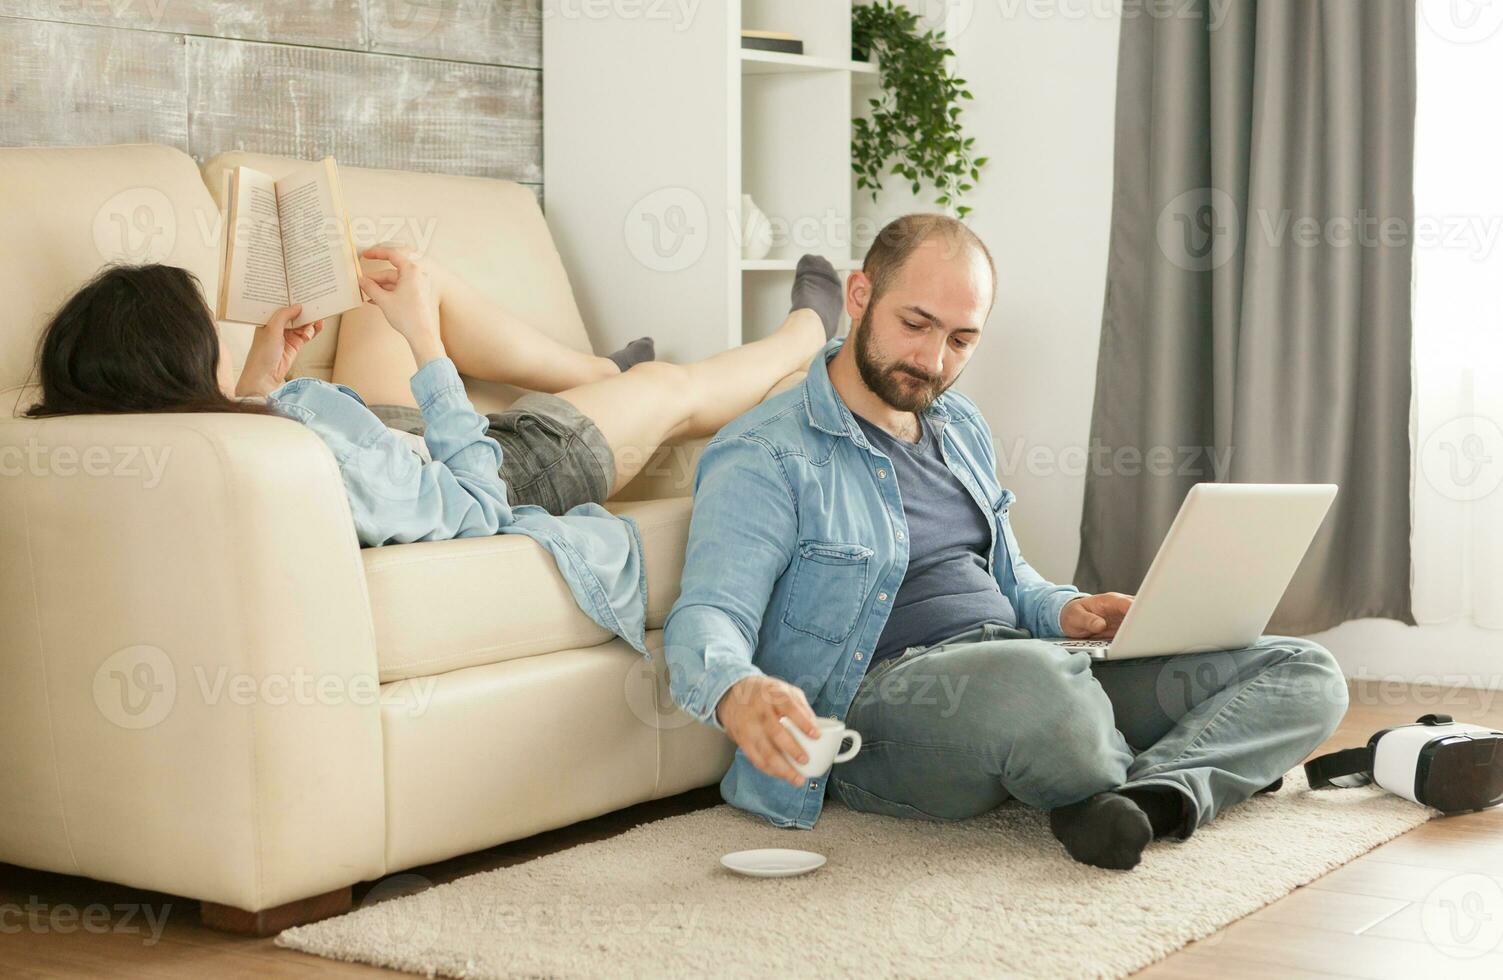 Man holding coffee cup while the wife is reading a book. photo